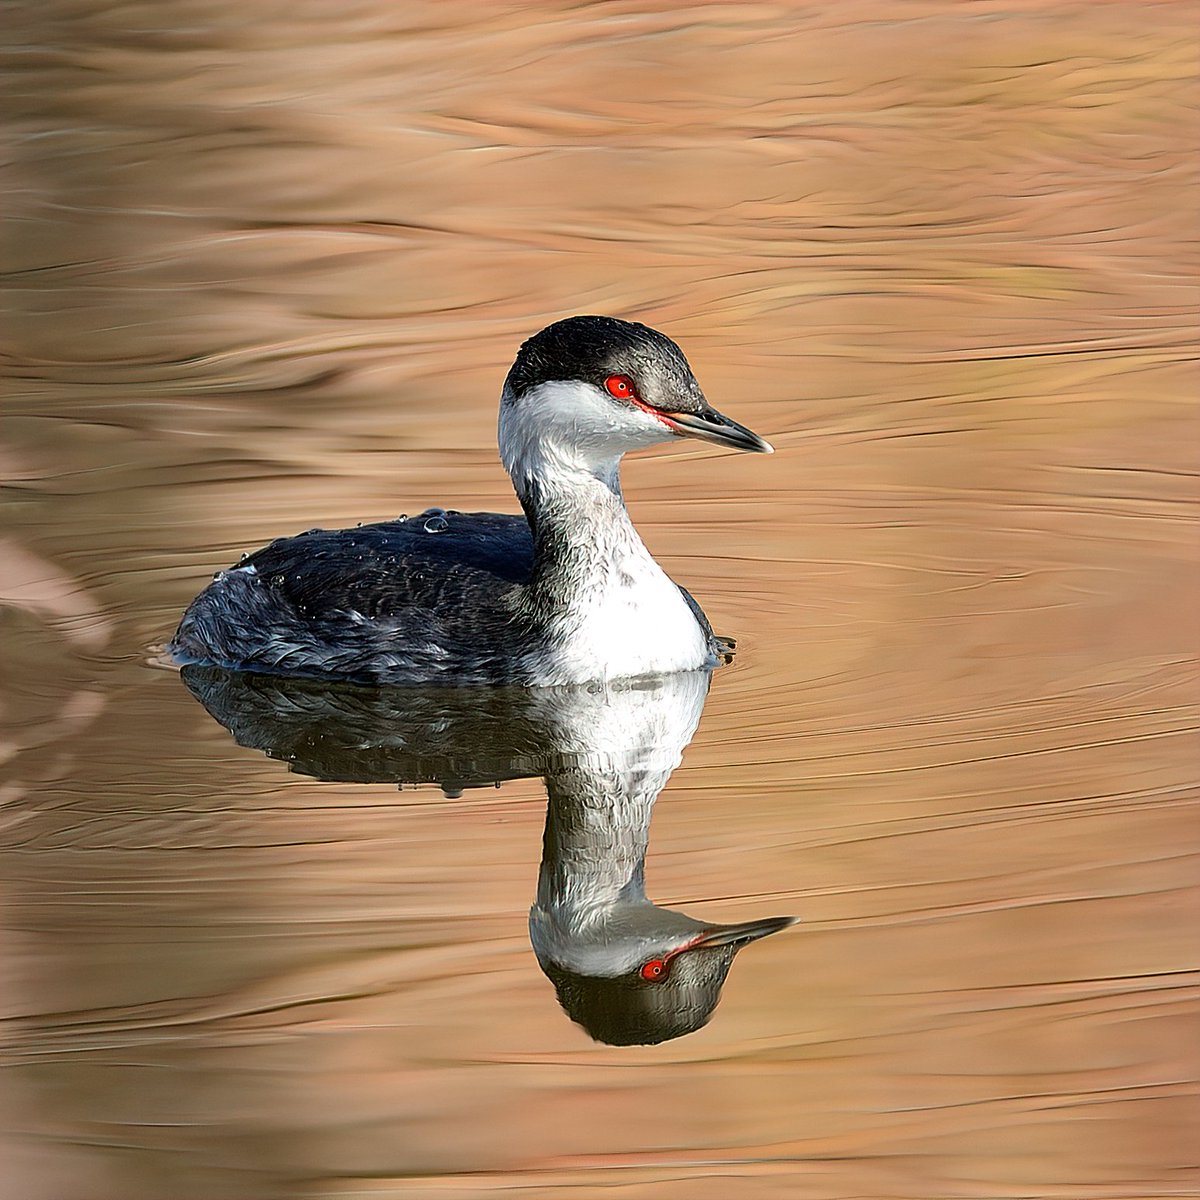 How about sharing a reflection Pic today? Open your gallery with any reflection pic. A small compact grebe with thin pointed bill & red eyes & a rare visitor to India. Horned Grebe - Podiceps auritus Also known as Slavonian Grebe. #IndiAves #ThePhotoHours